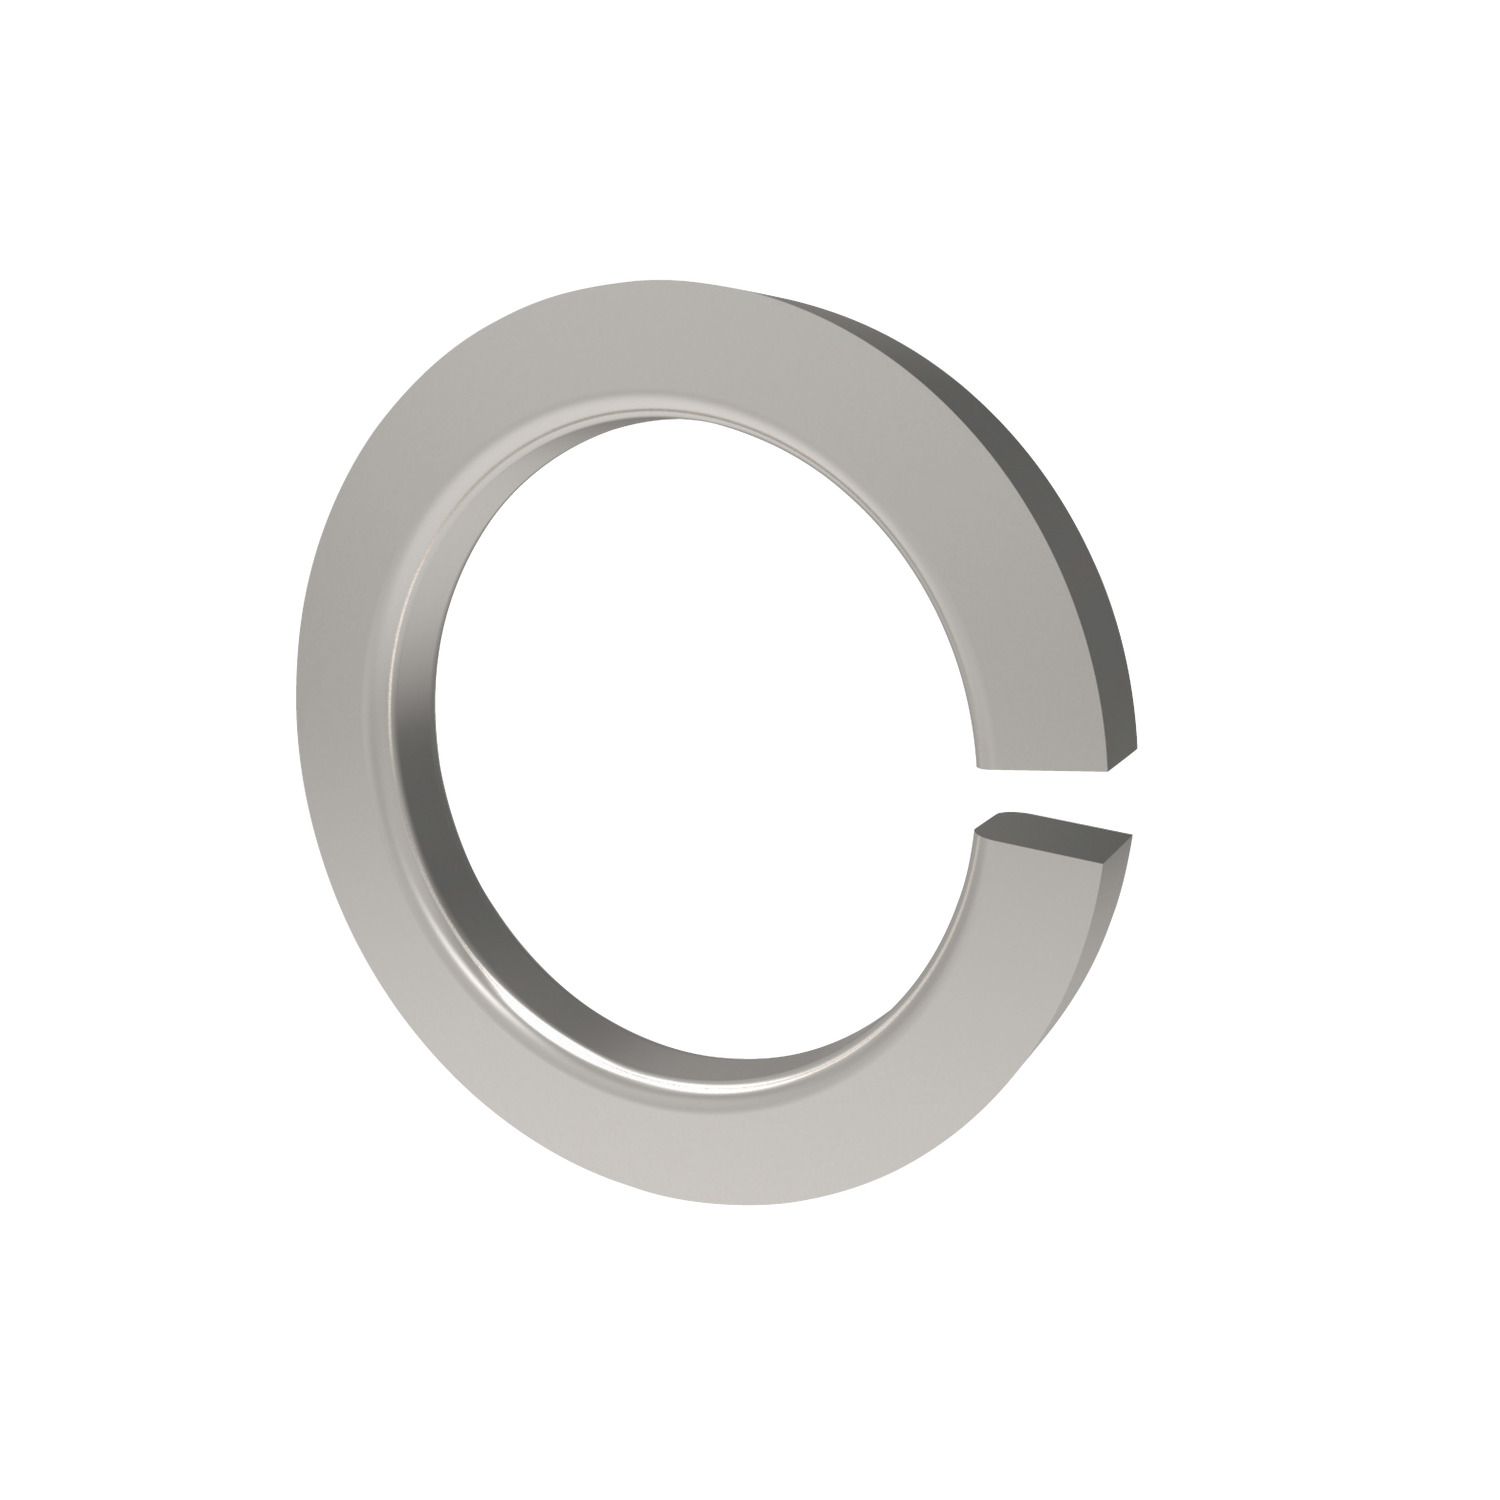 Rect. Section Washers Spring washers with a rectangular cross section. Their design allows for a locking effect whilst under load to prevent the loosening of joints when under vibration.